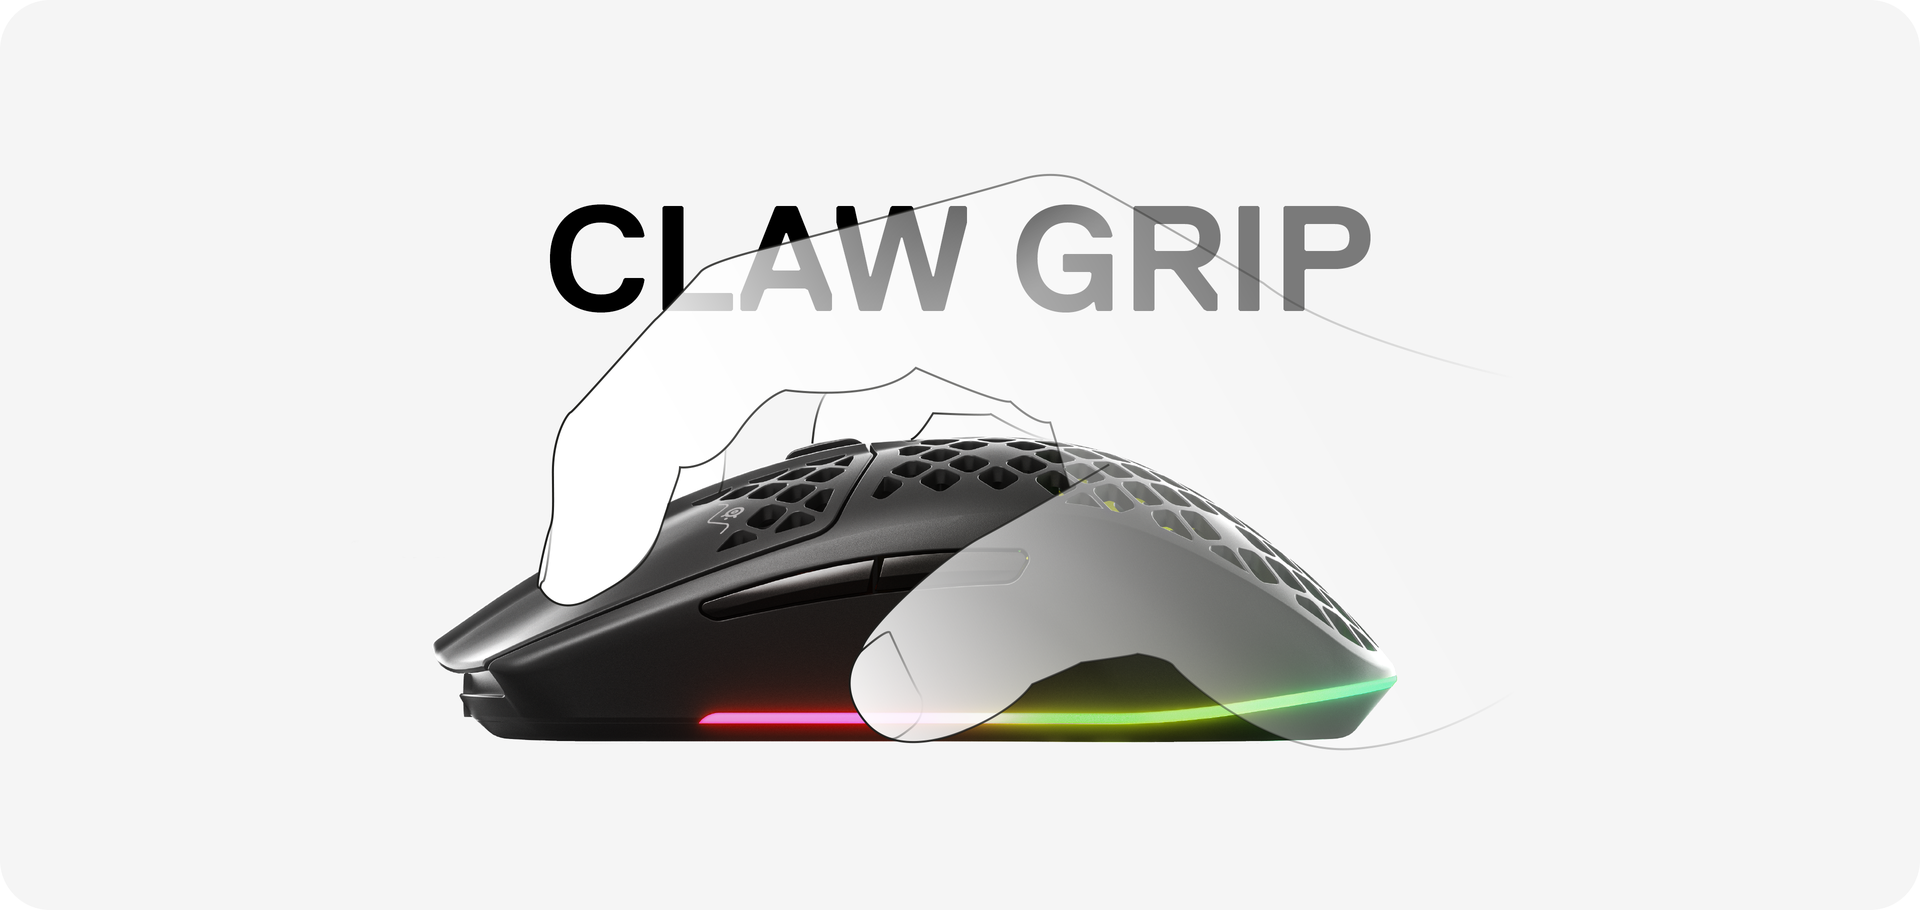 Illustration of a hand using the Aerox 3 Wireless 2022 mouse with a claw grip.